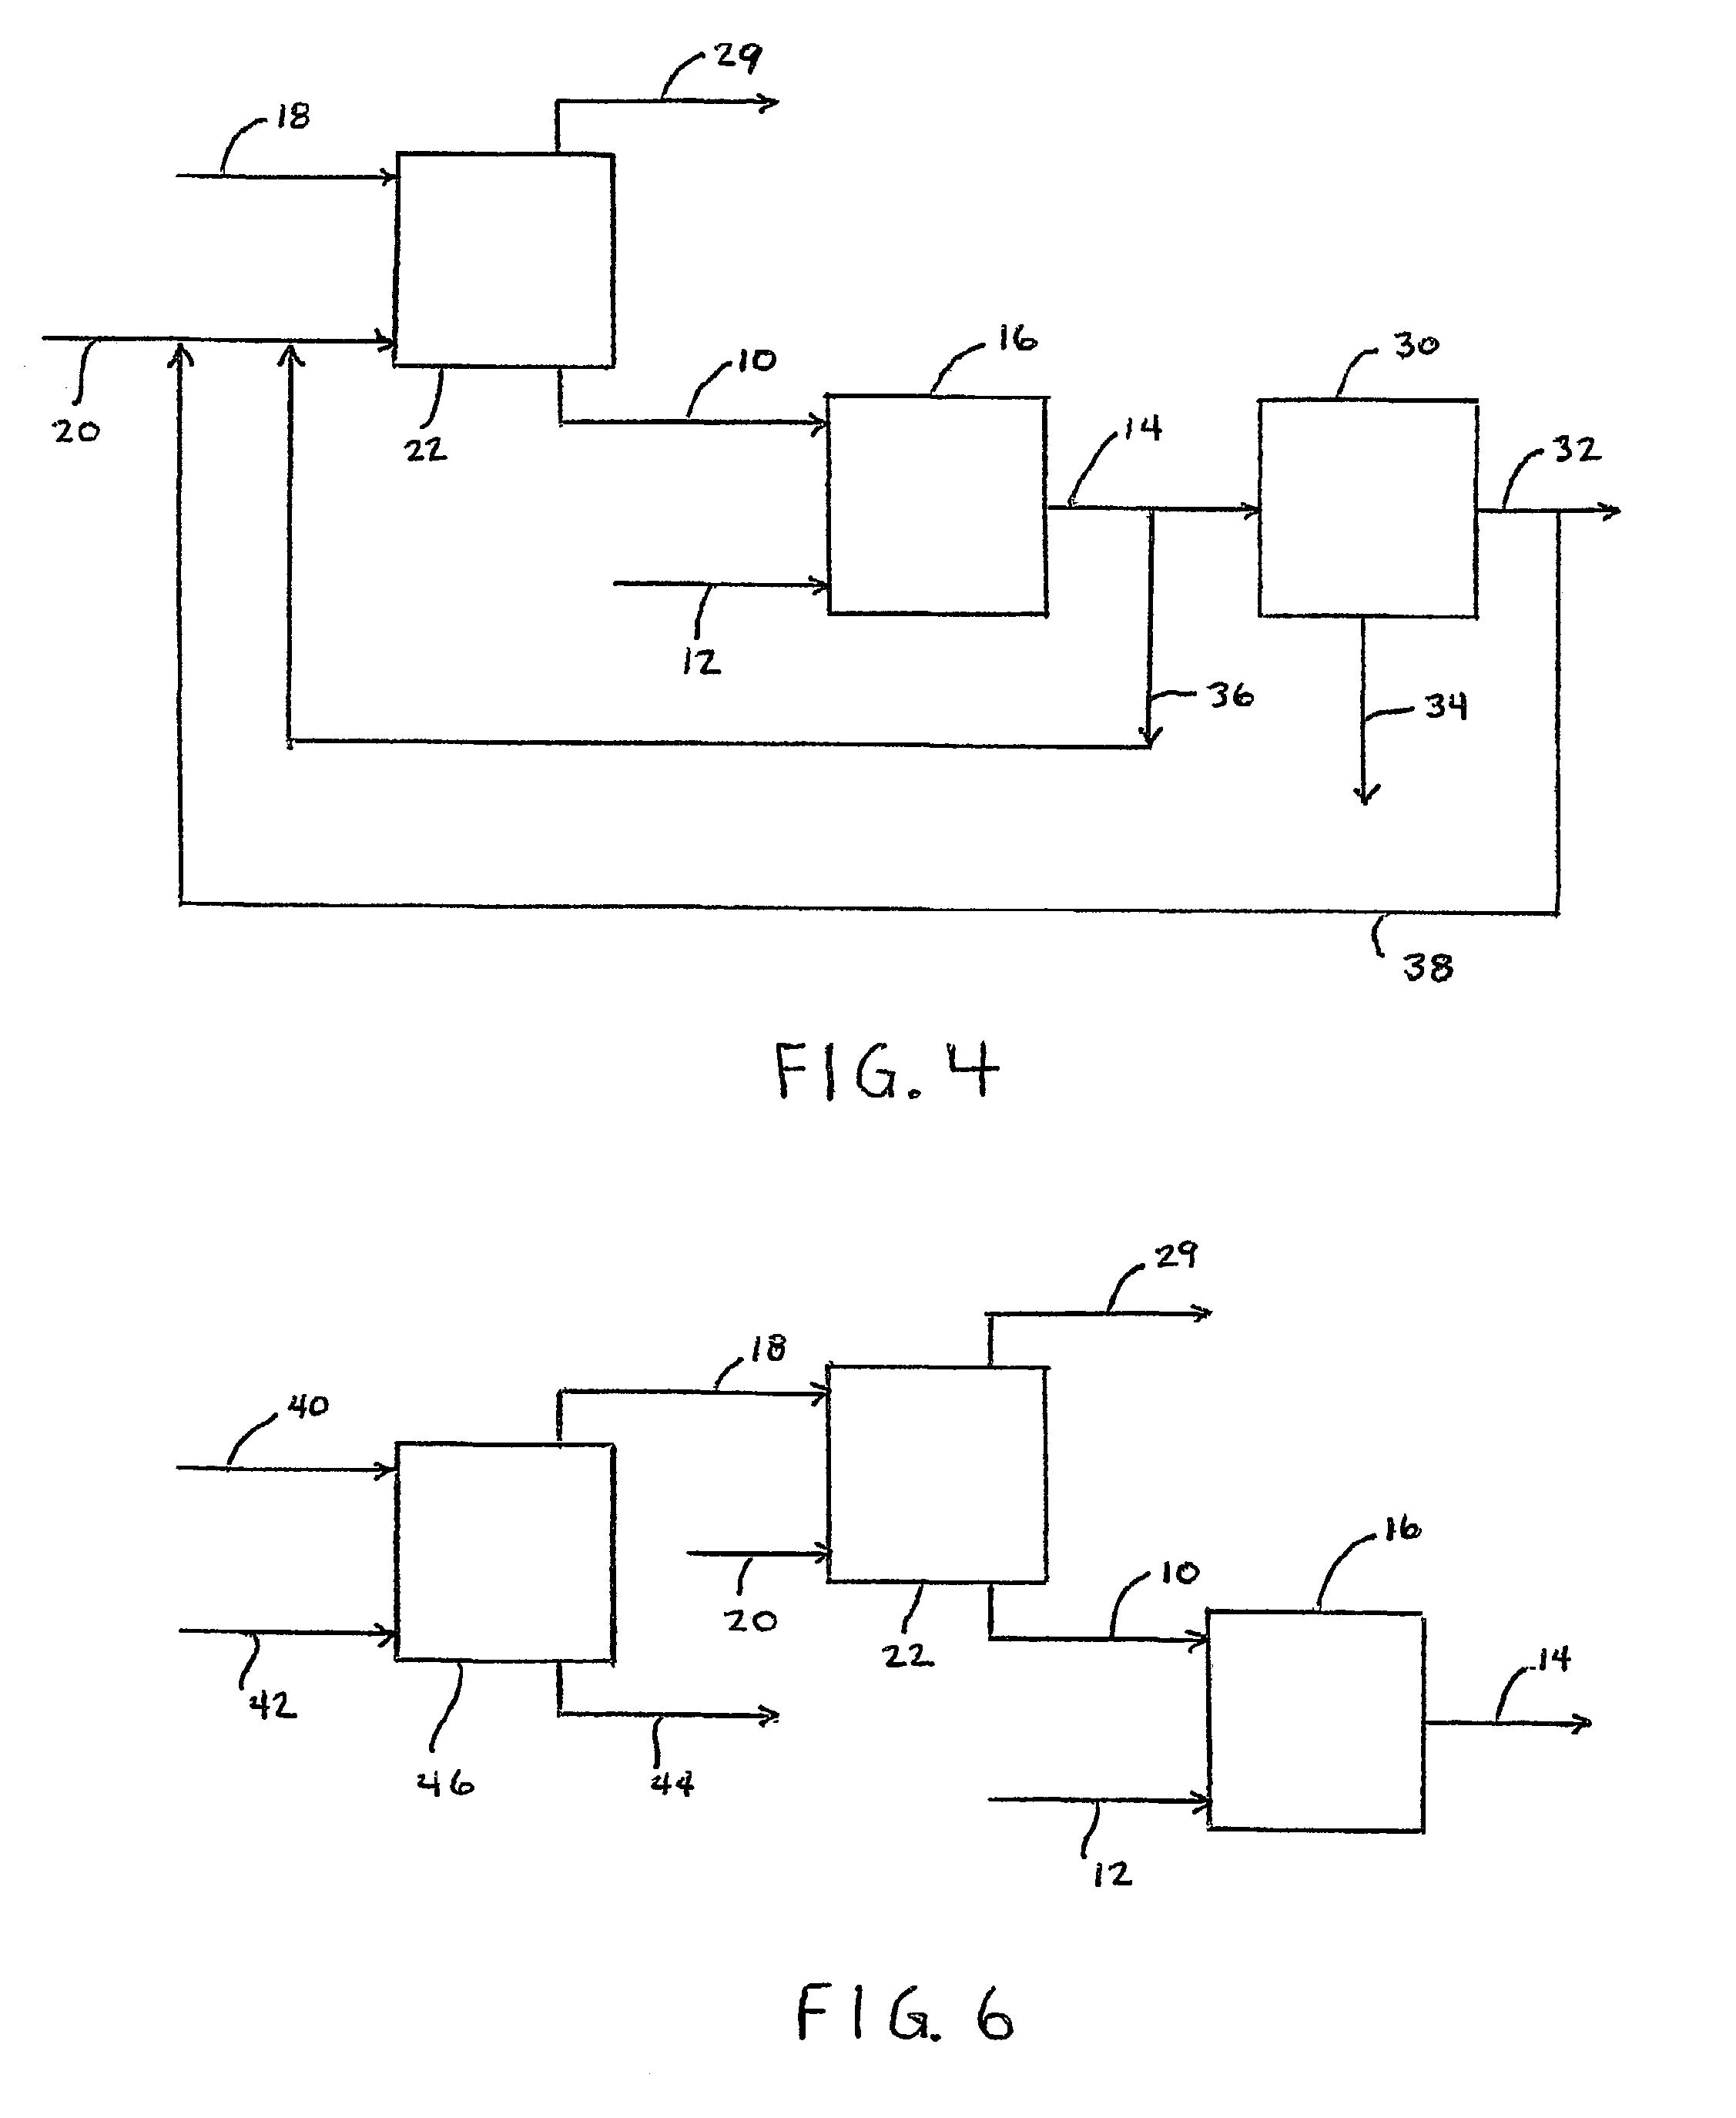 Universal method and apparatus for conversion of volatile compounds